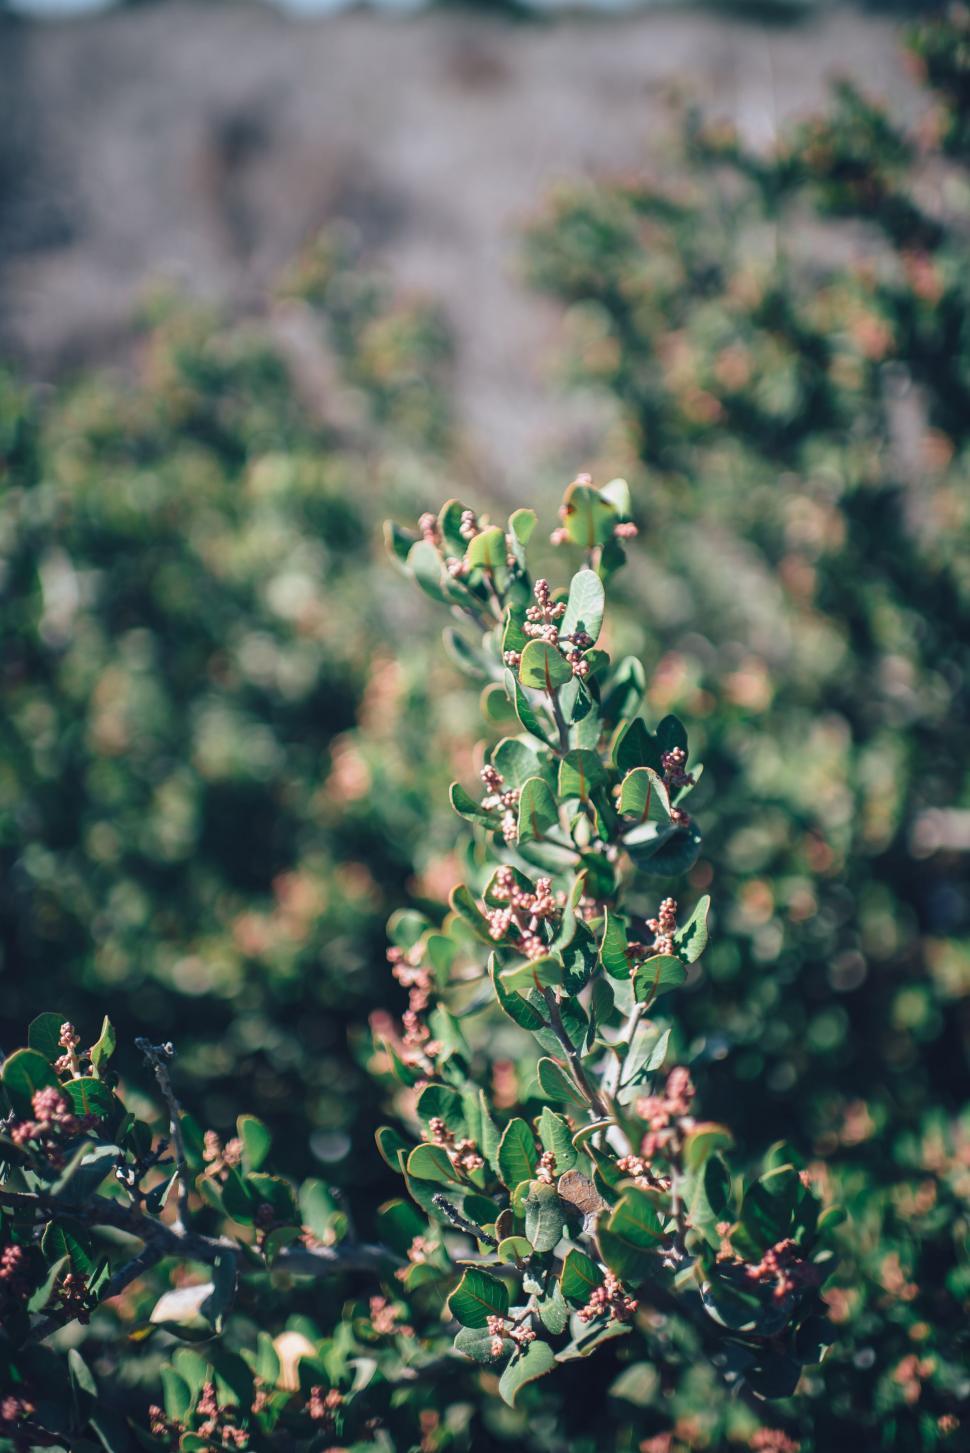 Free Image of Tiny Flower Buds 